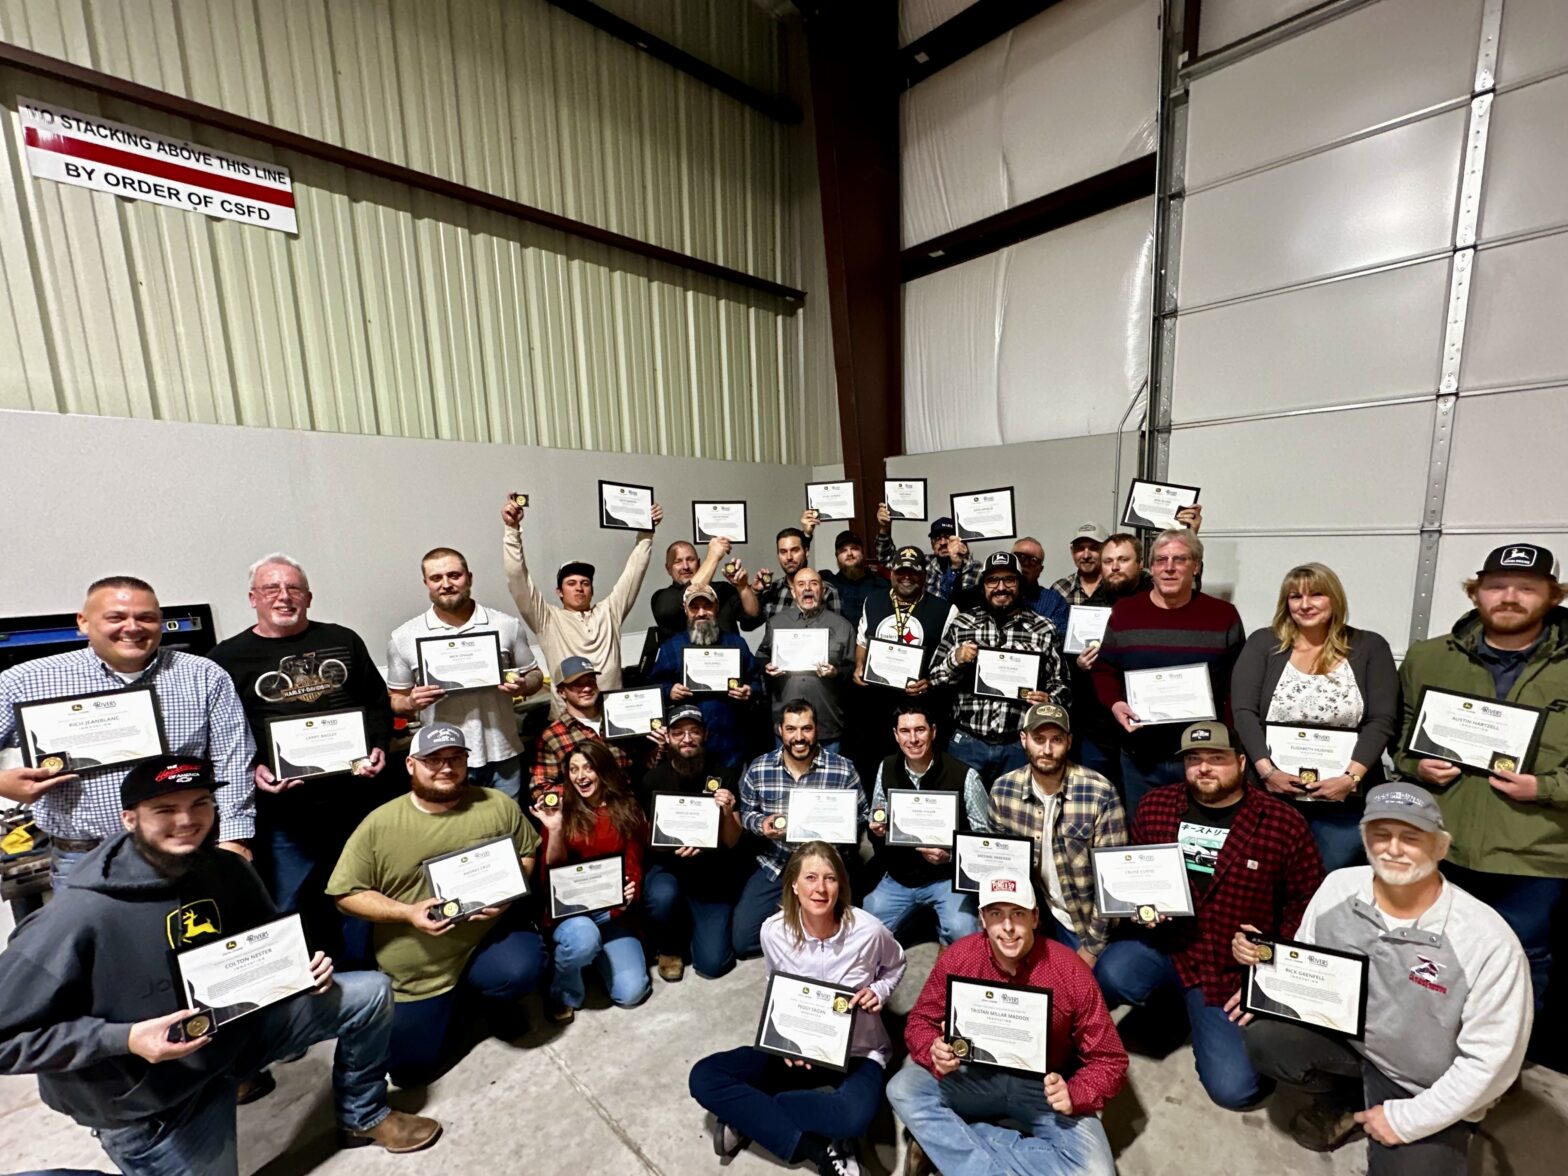 Colorado Springs Aftermarket Team pictured together Achieves Innovation Milestone at 4Rivers Equipment